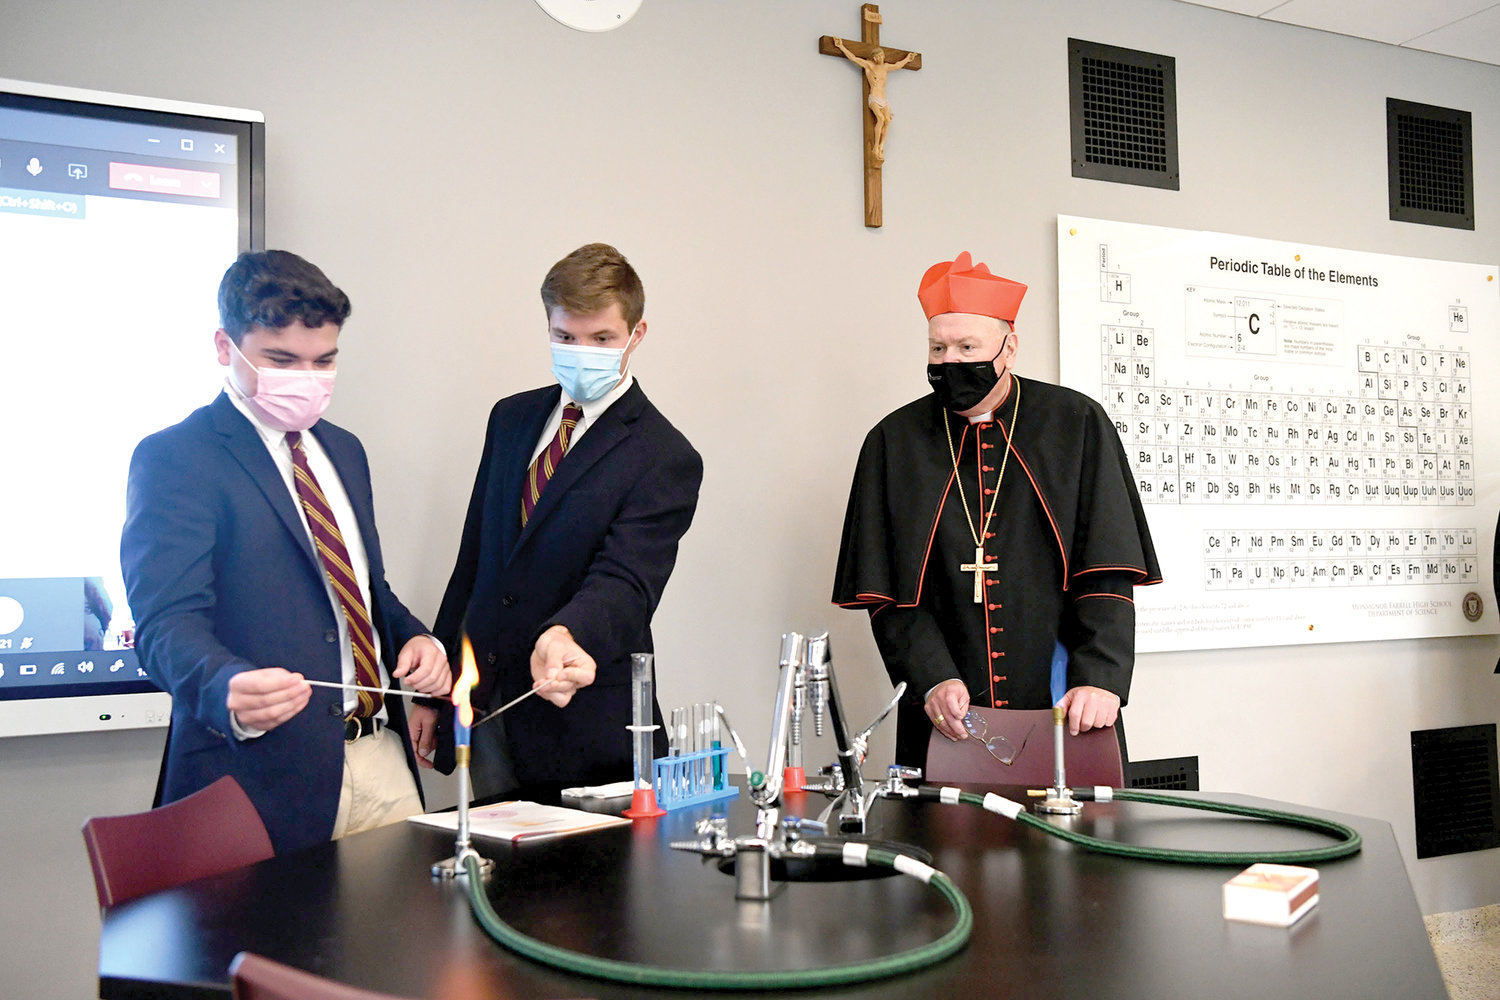 GOOD CHEMISTRY—Students Eddie Morales and James Moore of Msgr. Farrell High School on Staten Island  demonstrate a chemistry experiment for Cardinal Dolan during his visit to the school in October 2020. That day, the cardinal dedicated several new facilities on campus, including three renovated science labs.